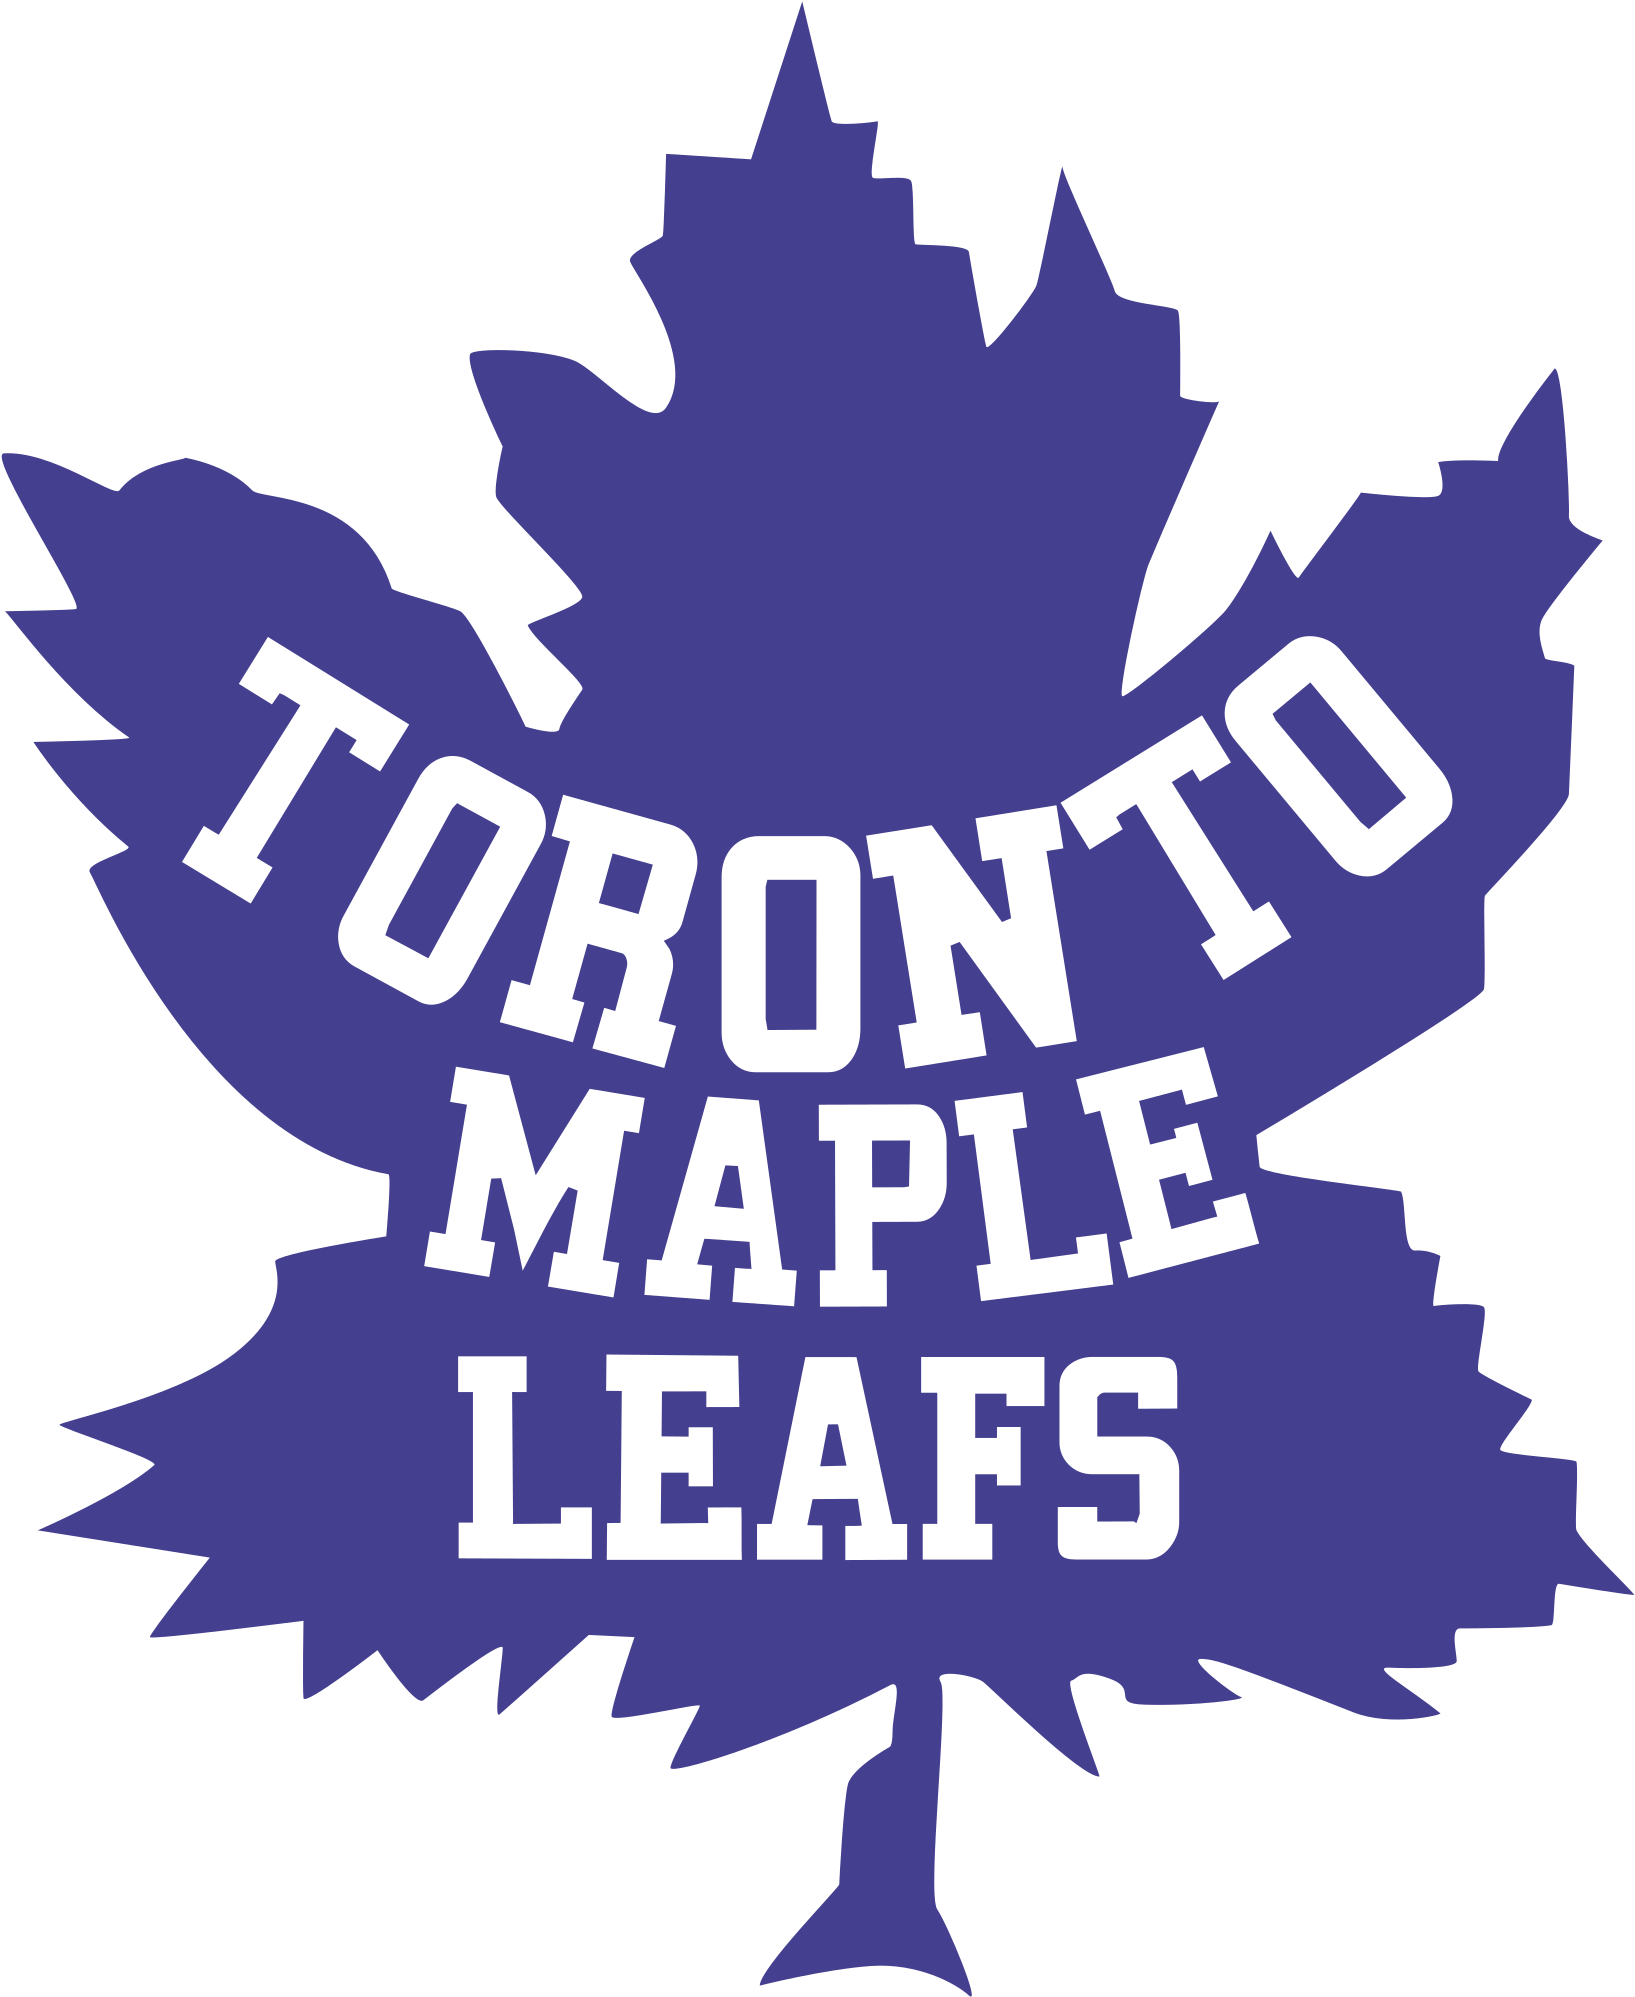 Toronto Maple Leafs Logo Png Transparent Toronto Maple Leafs Clipart